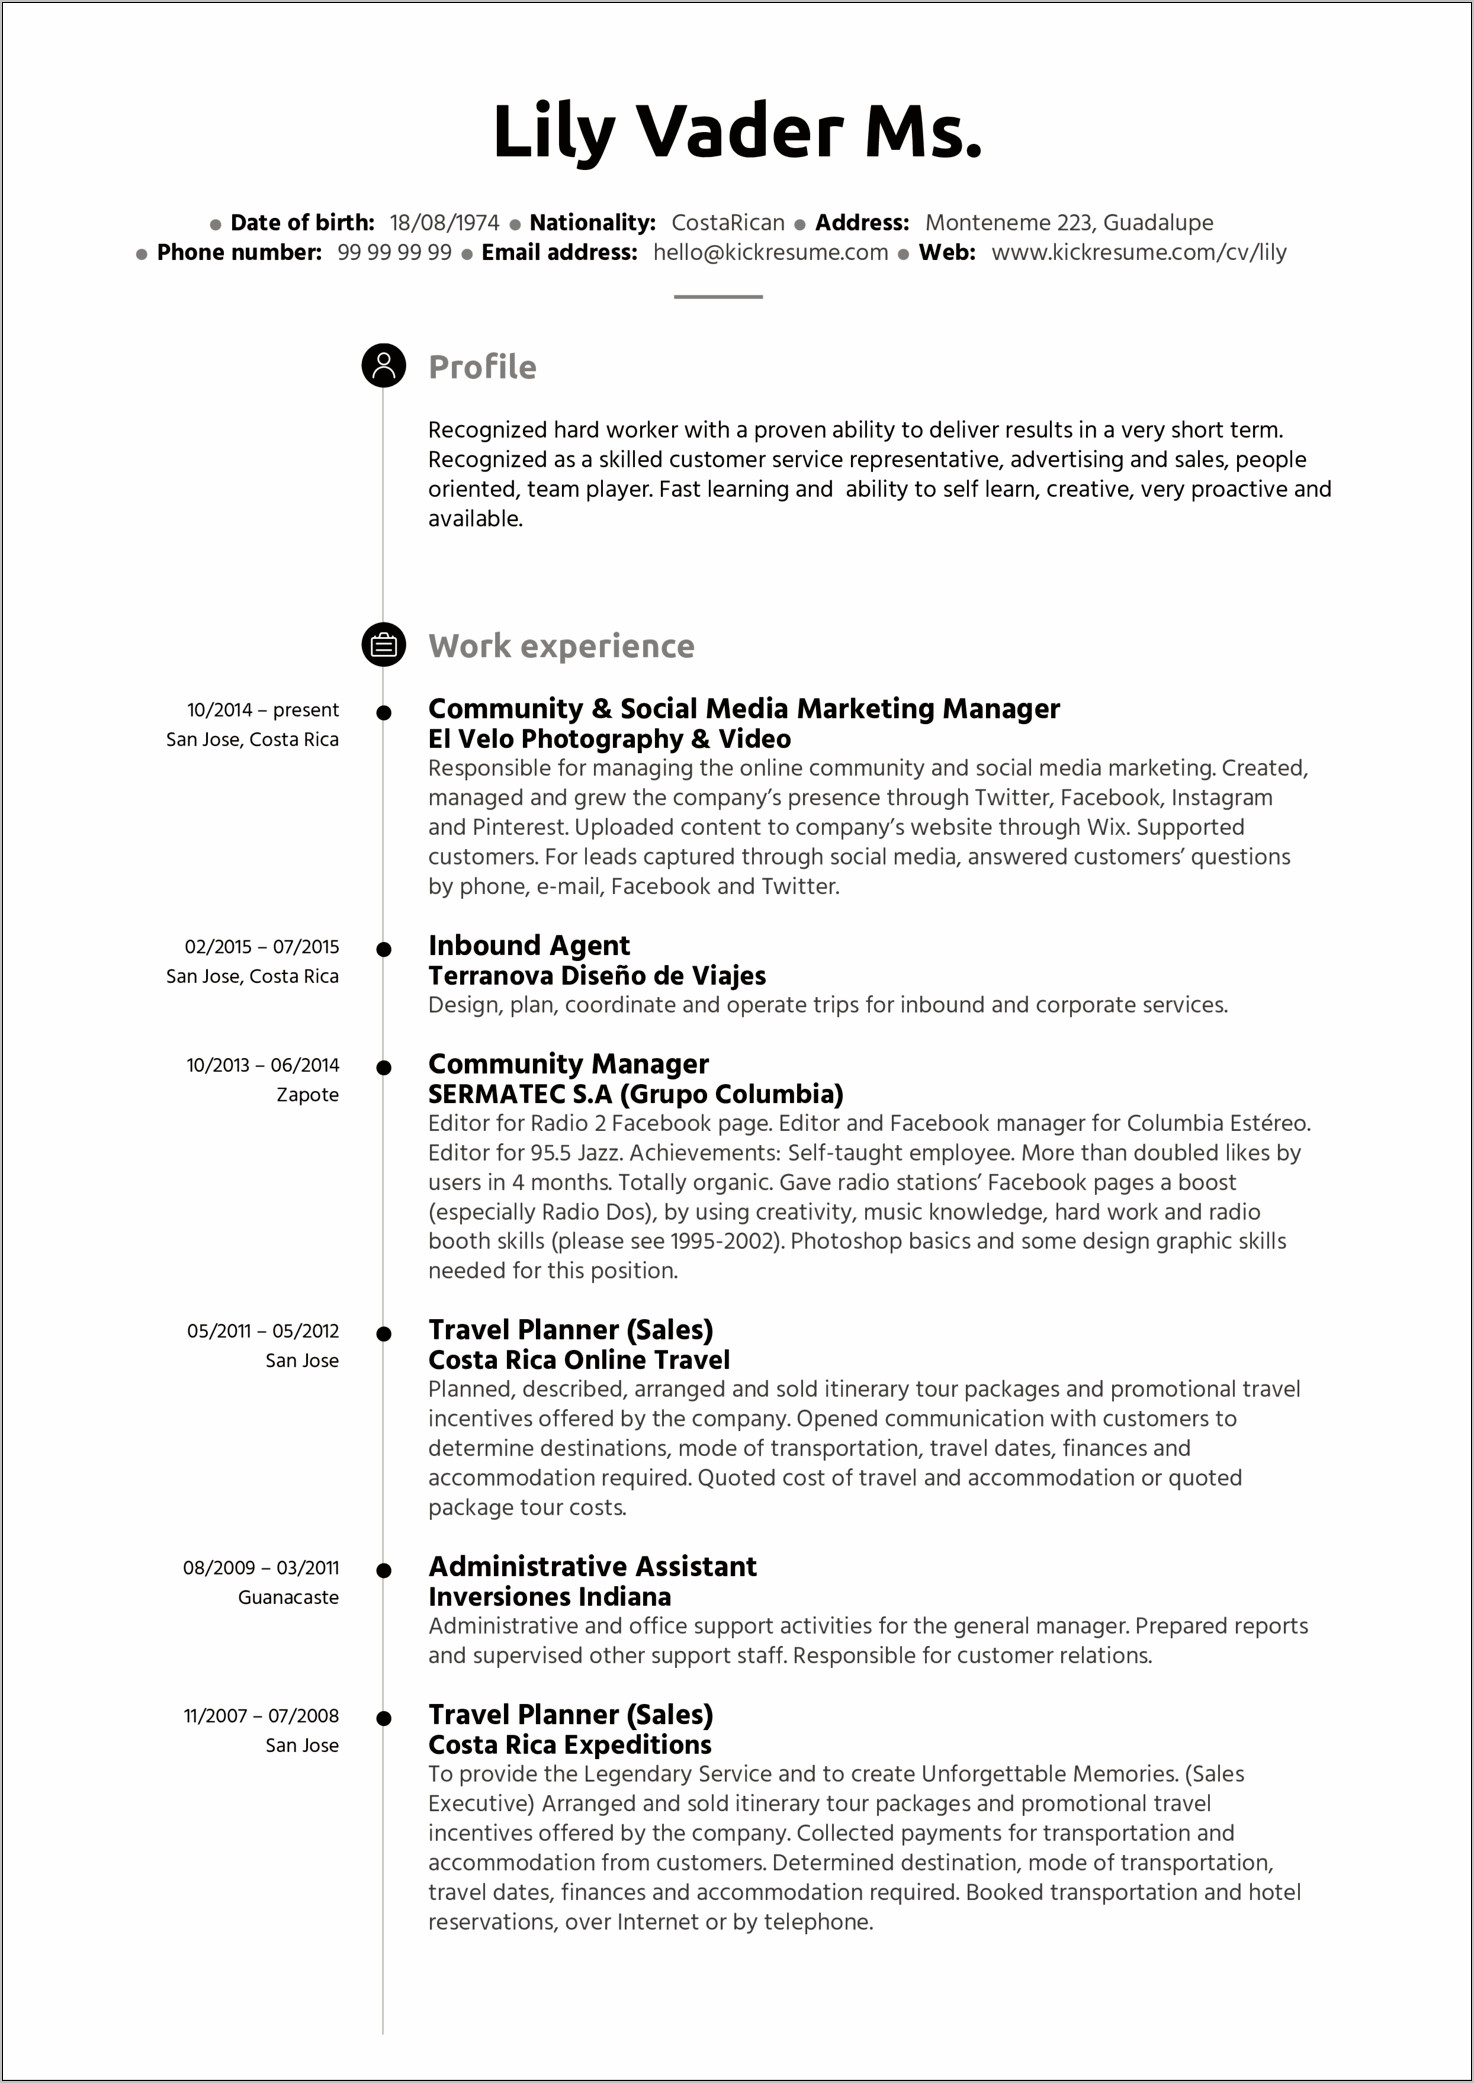 Administrative Assistant Sample Resume Word